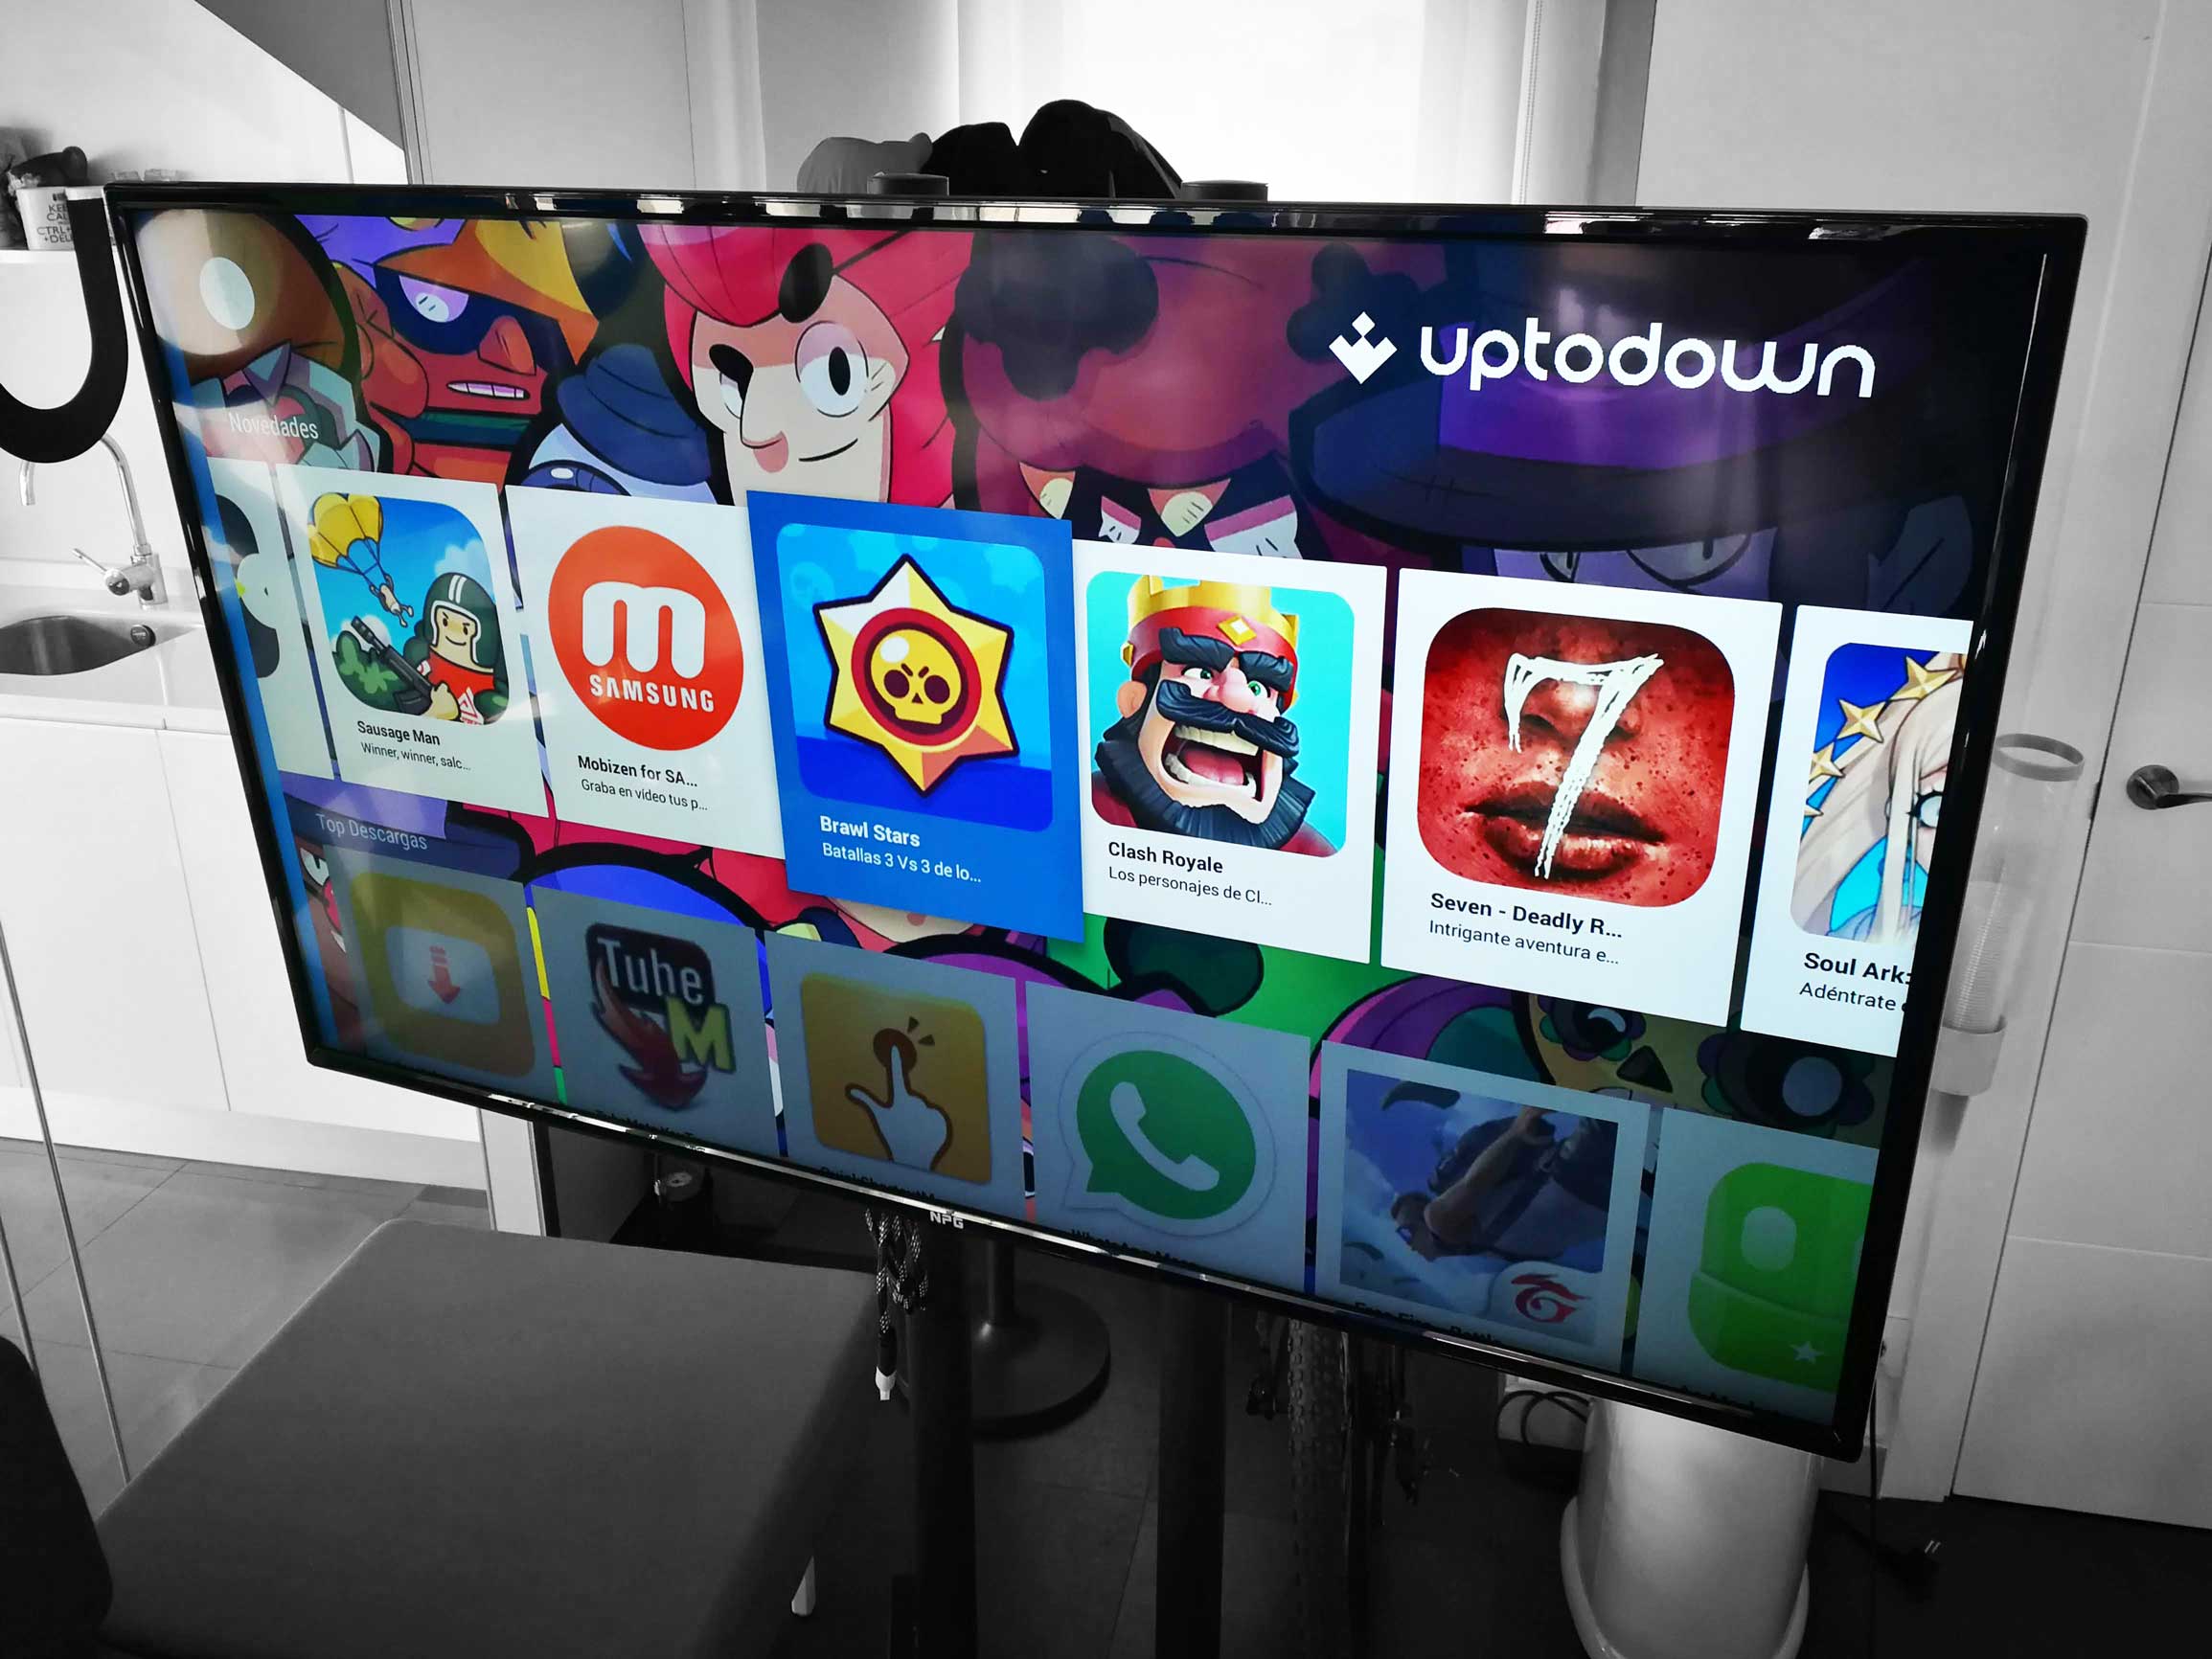 Android App Market Uptodown Joins Unity Distribution Portal - uptodown android ar uptodown brawl stars